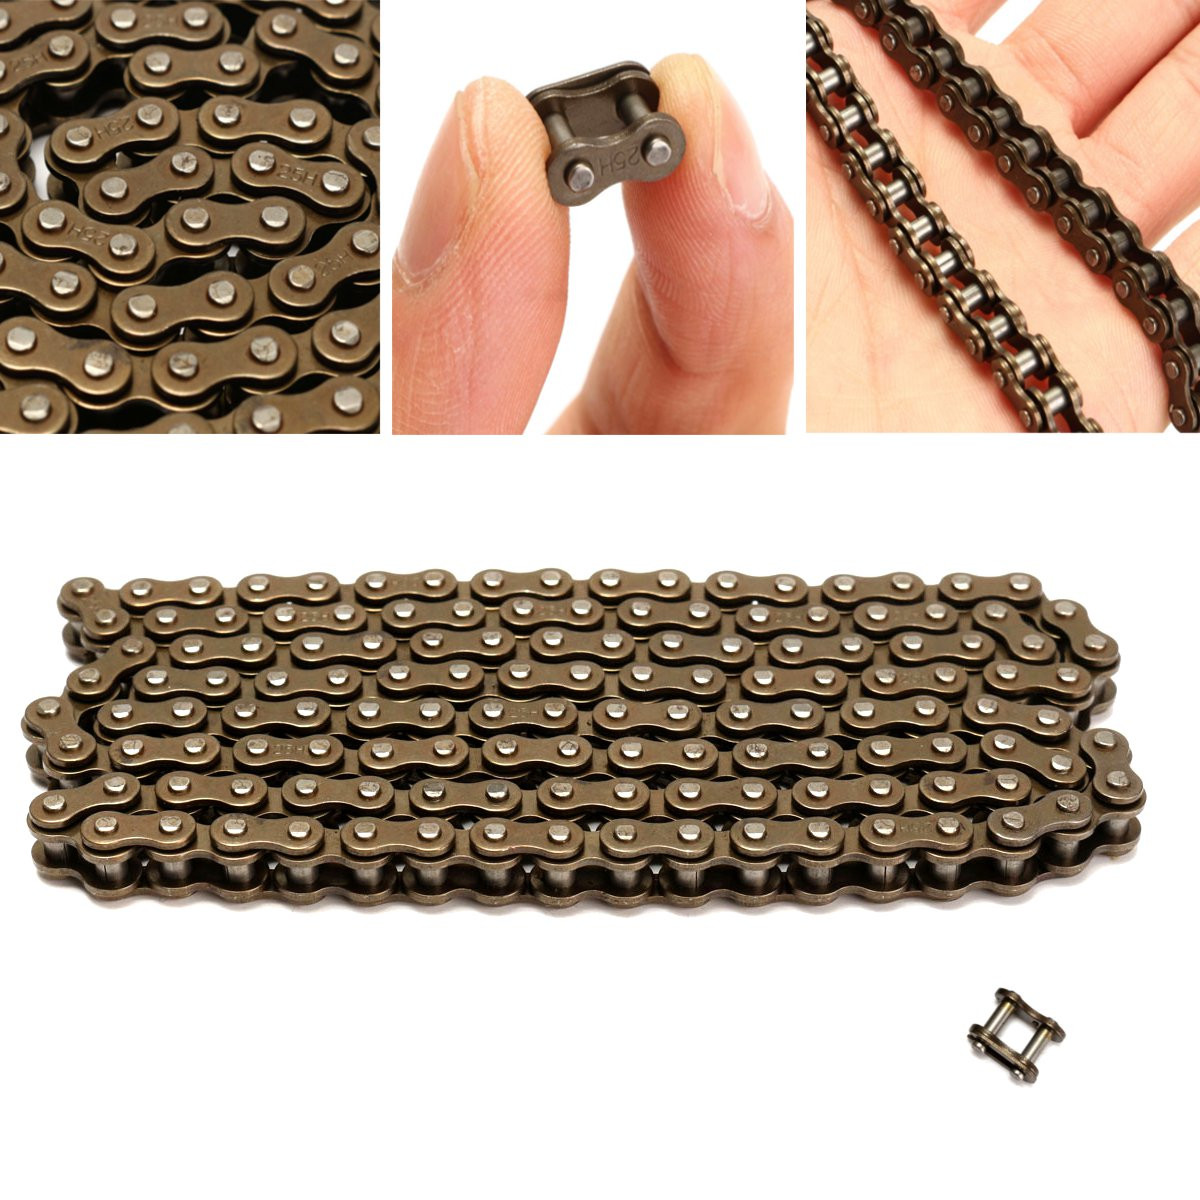 

47cc 49cc Chain 25H With Spare For High Speed Mini Moto Dirt ATV Quad Scooter Pocket Bike